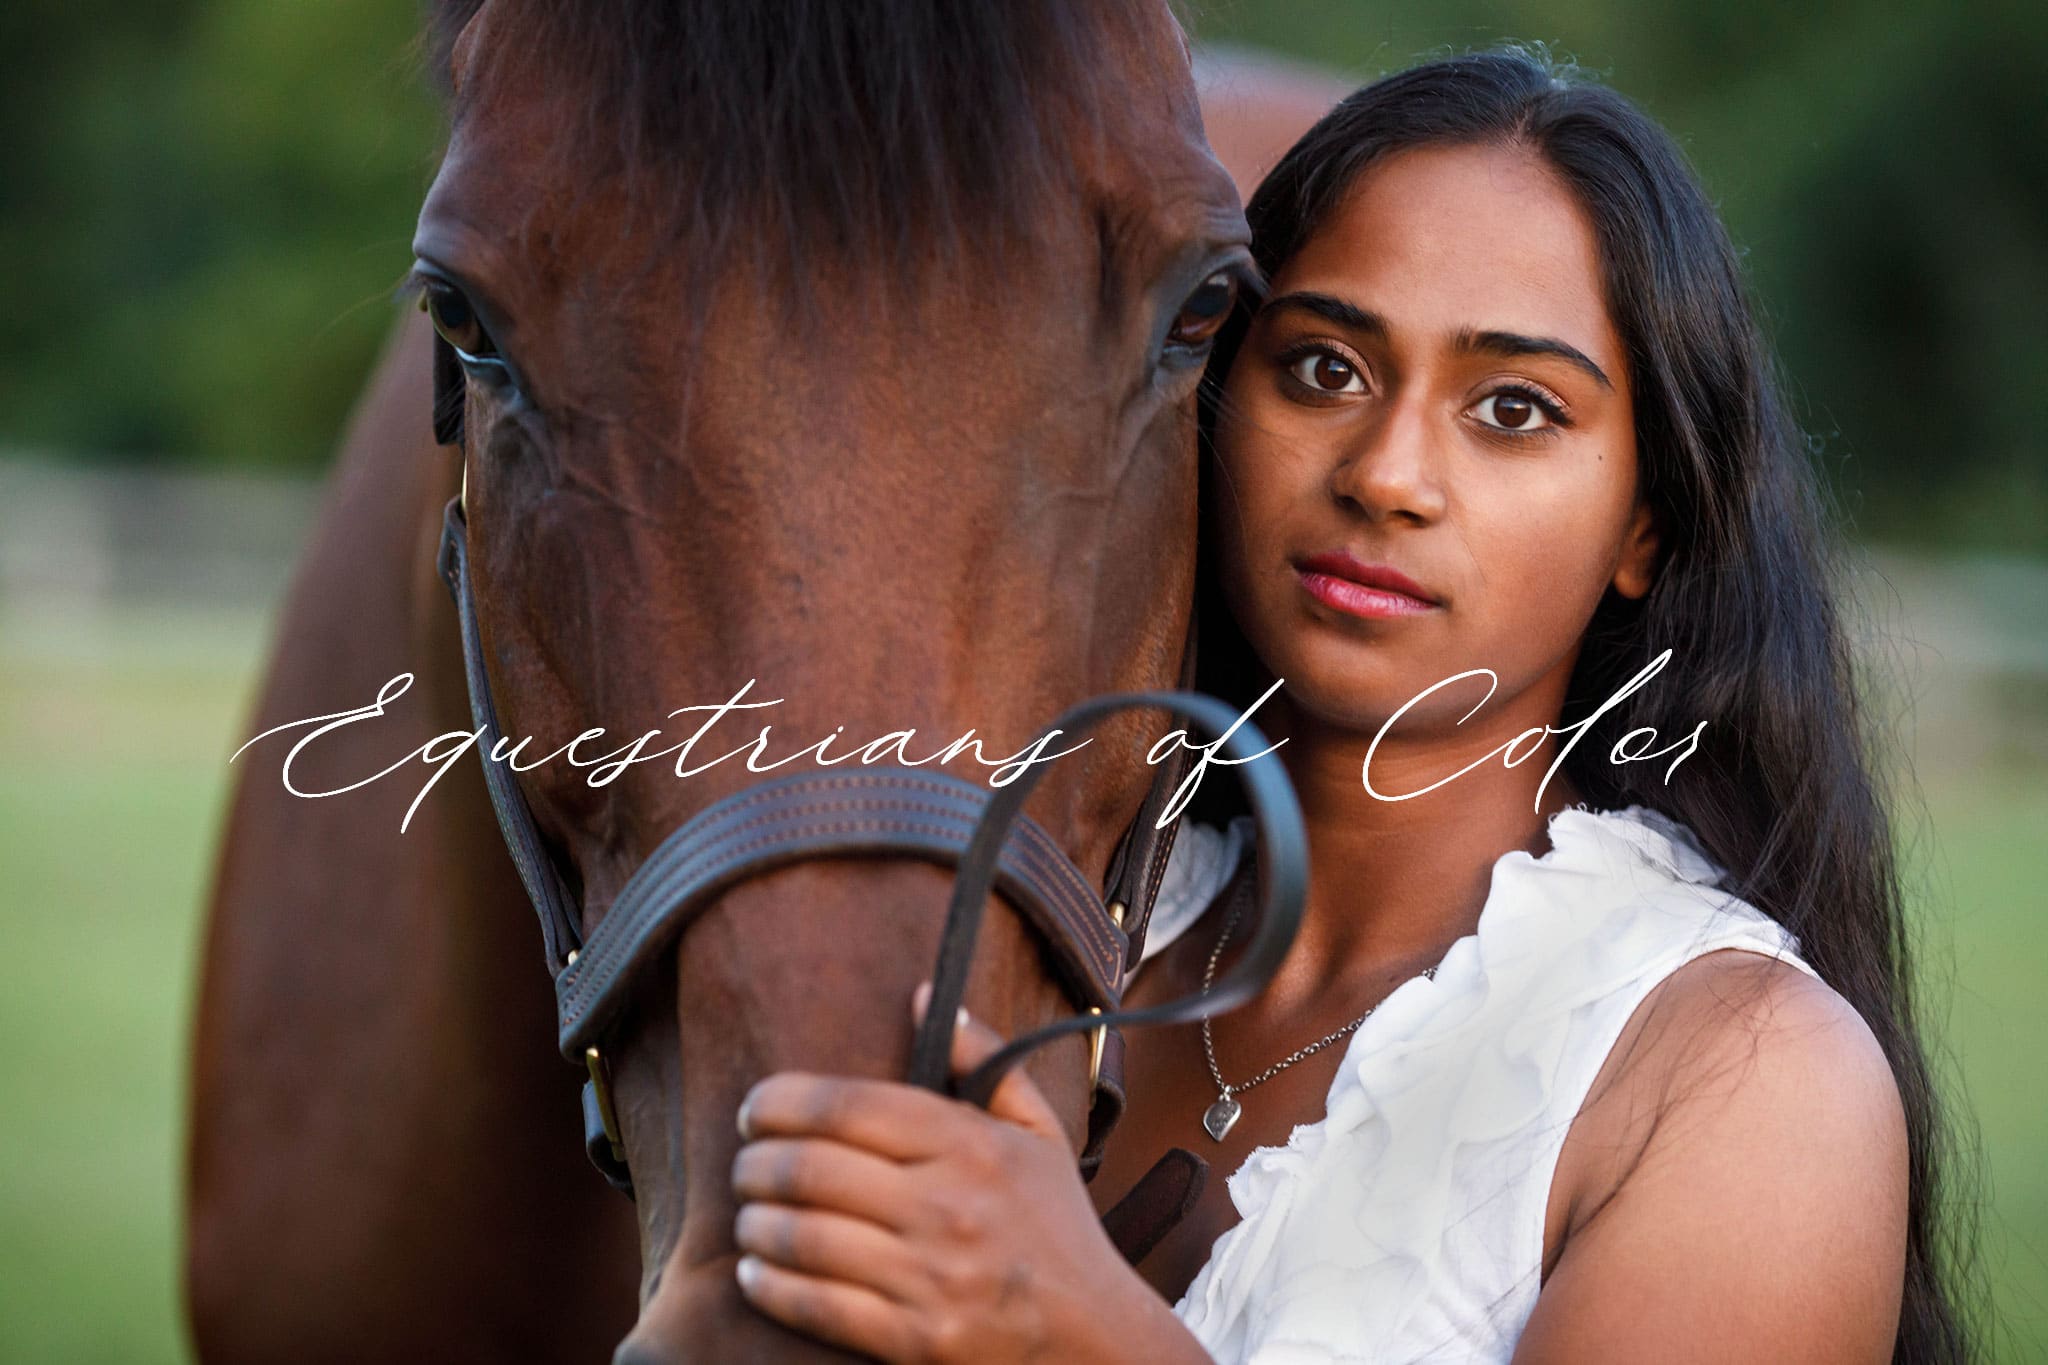 Equestrians of Color Project